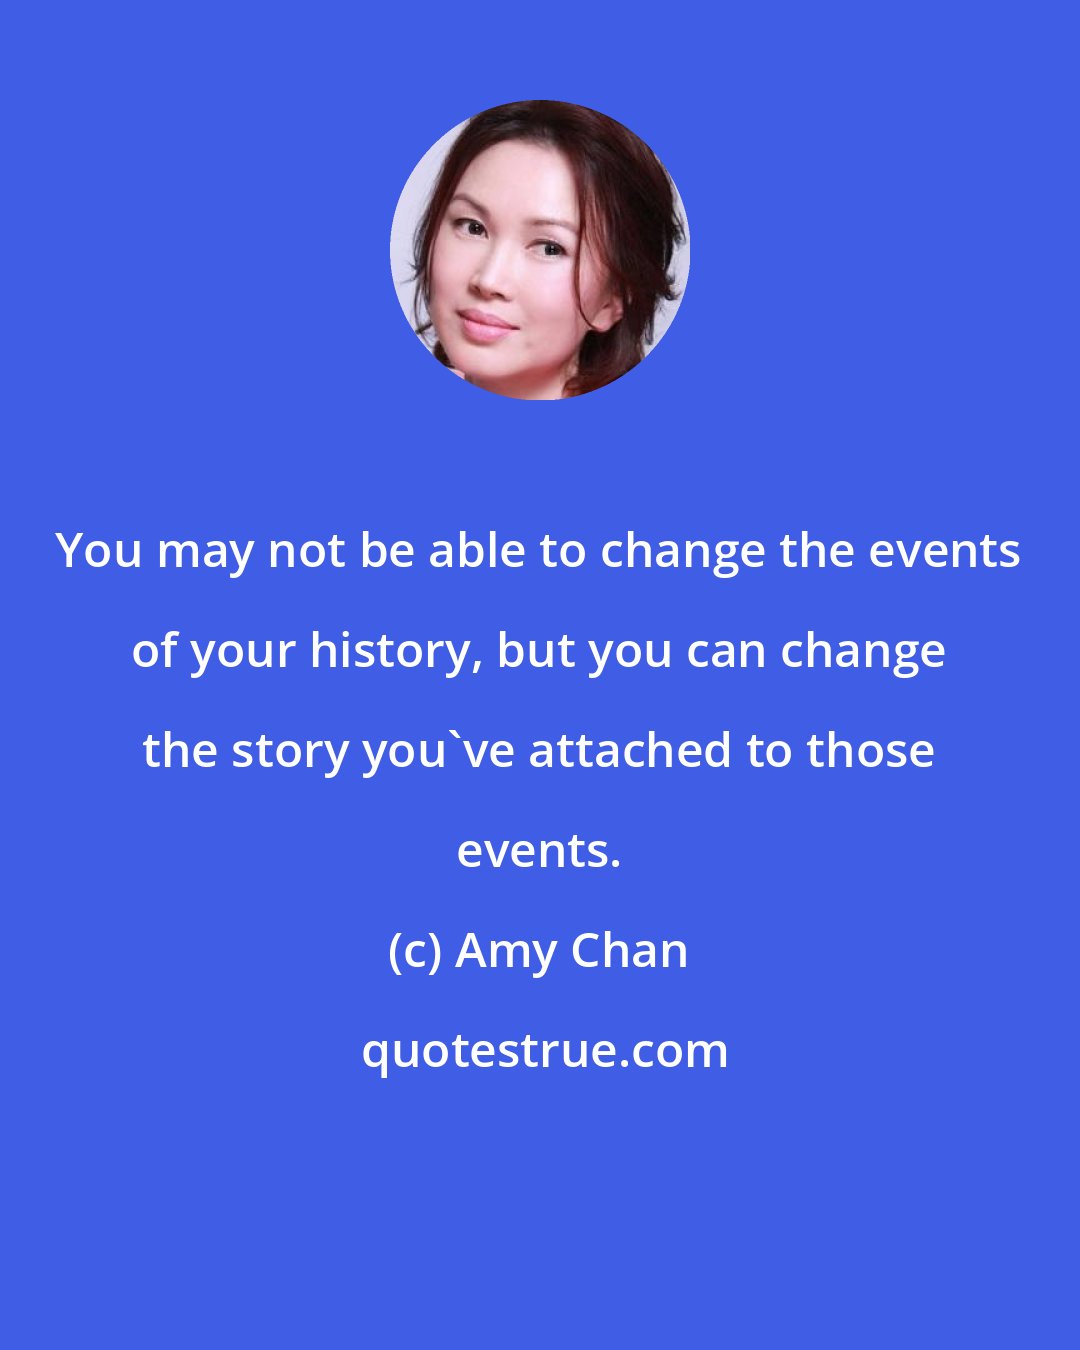 Amy Chan: You may not be able to change the events of your history, but you can change the story you've attached to those events.